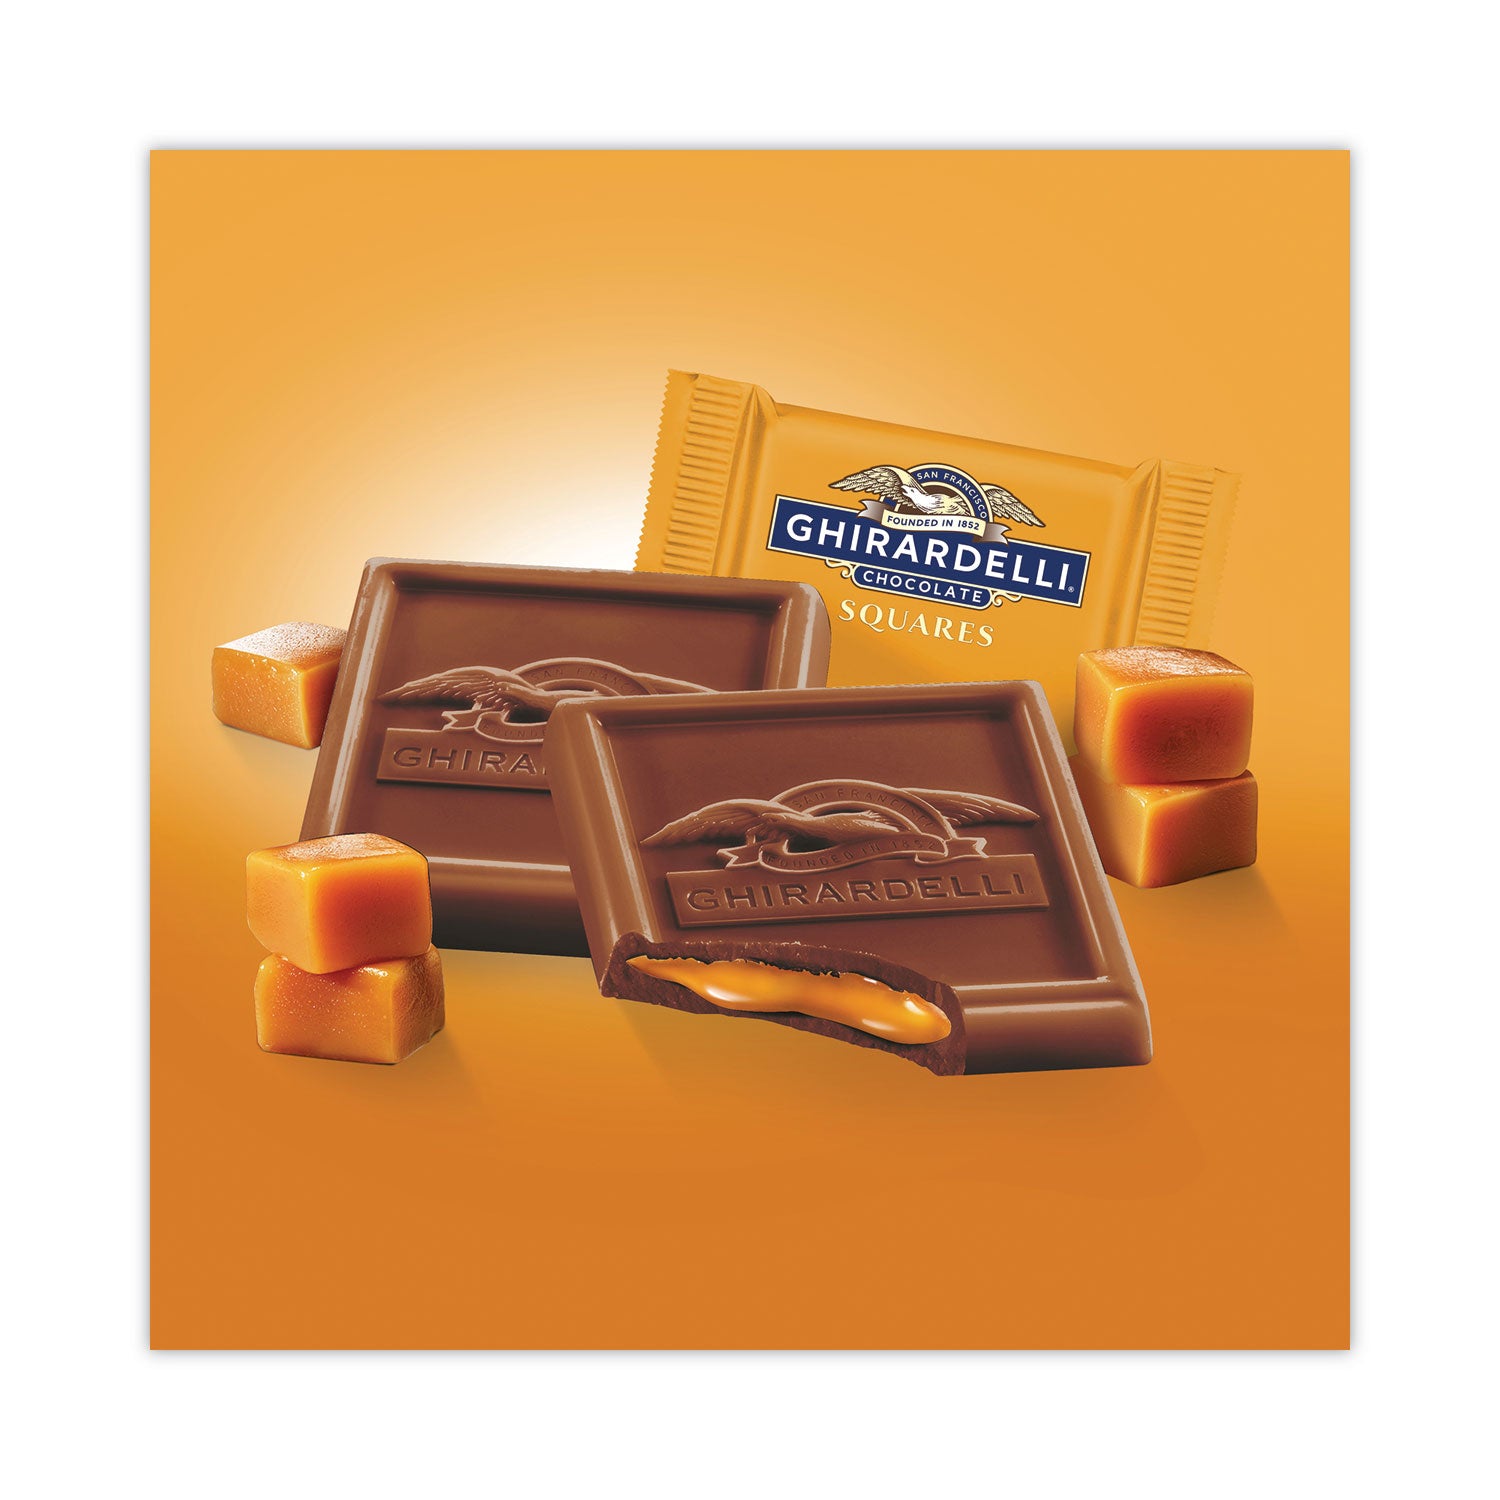 milk-chocolate-and-caramel-chocolate-squares-1596-oz-bag-ships-in-1-3-business-days_grr30001035 - 2